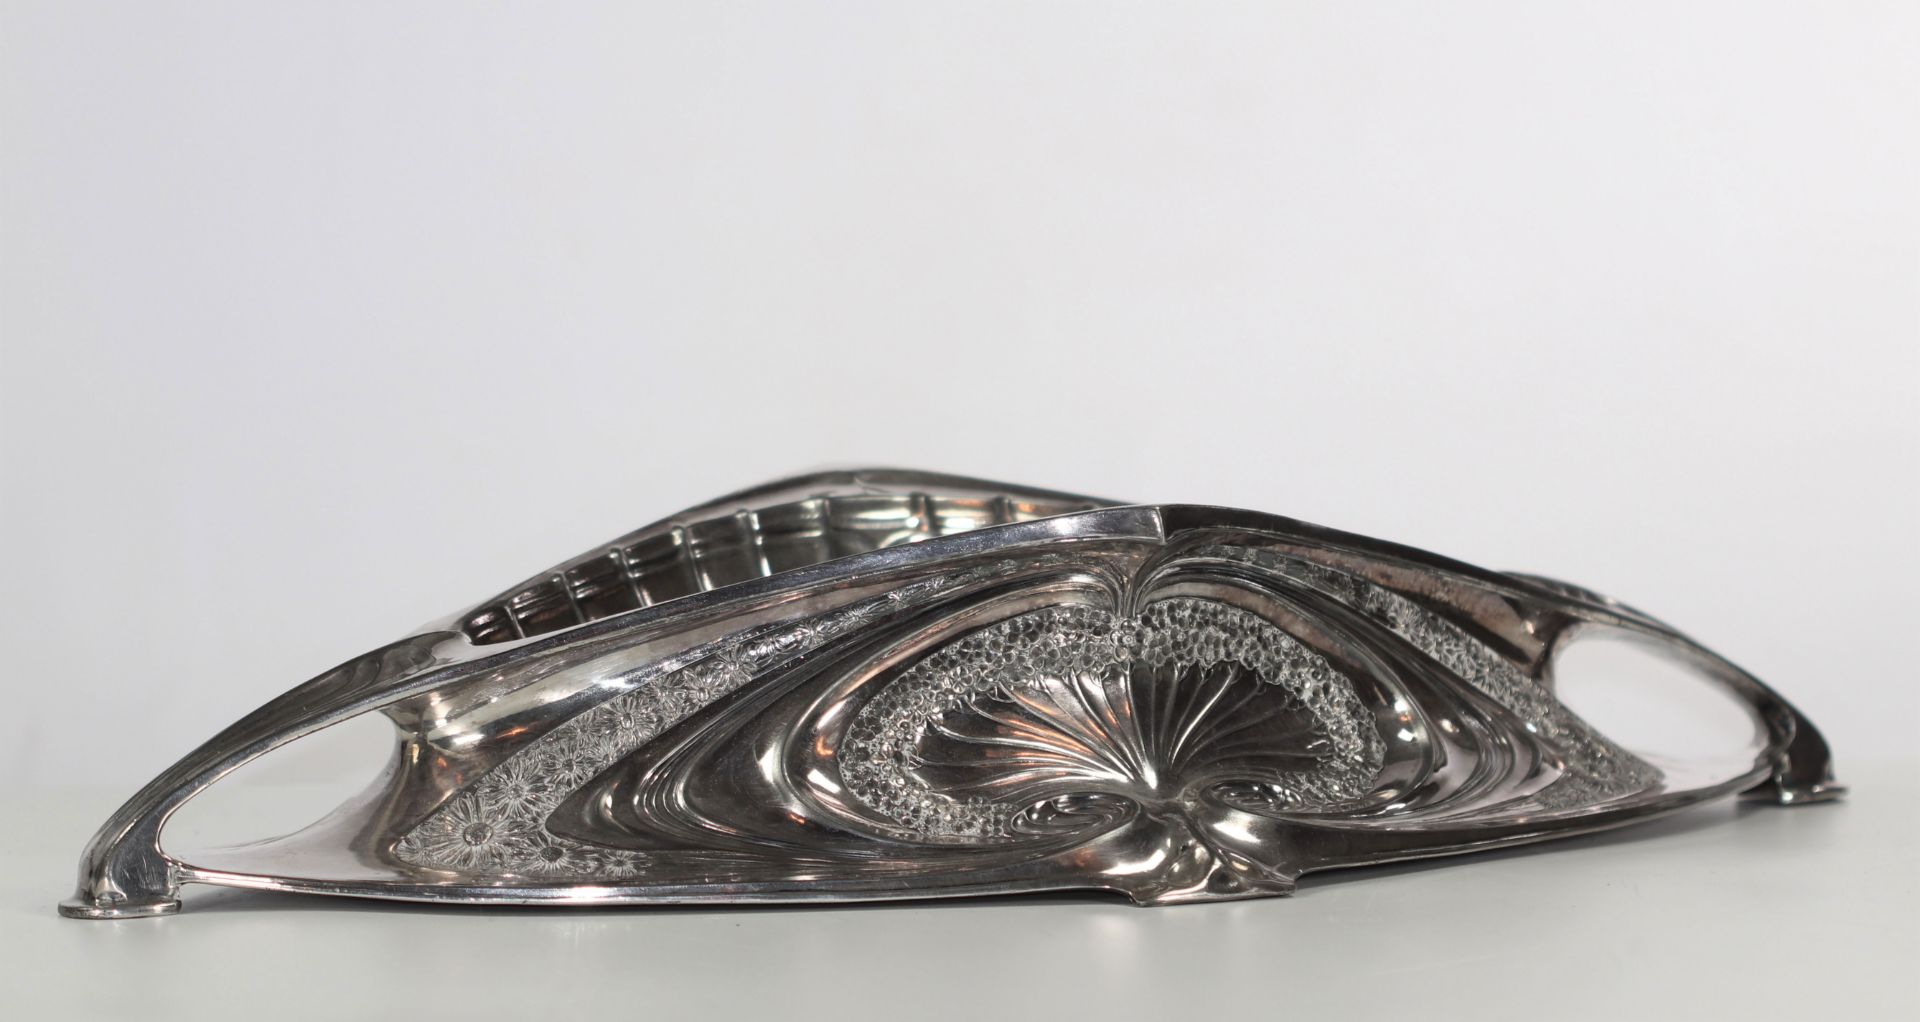 Art Nouveau silver-plated planter, probably WMF, Germany, circa 1900 - Image 2 of 4